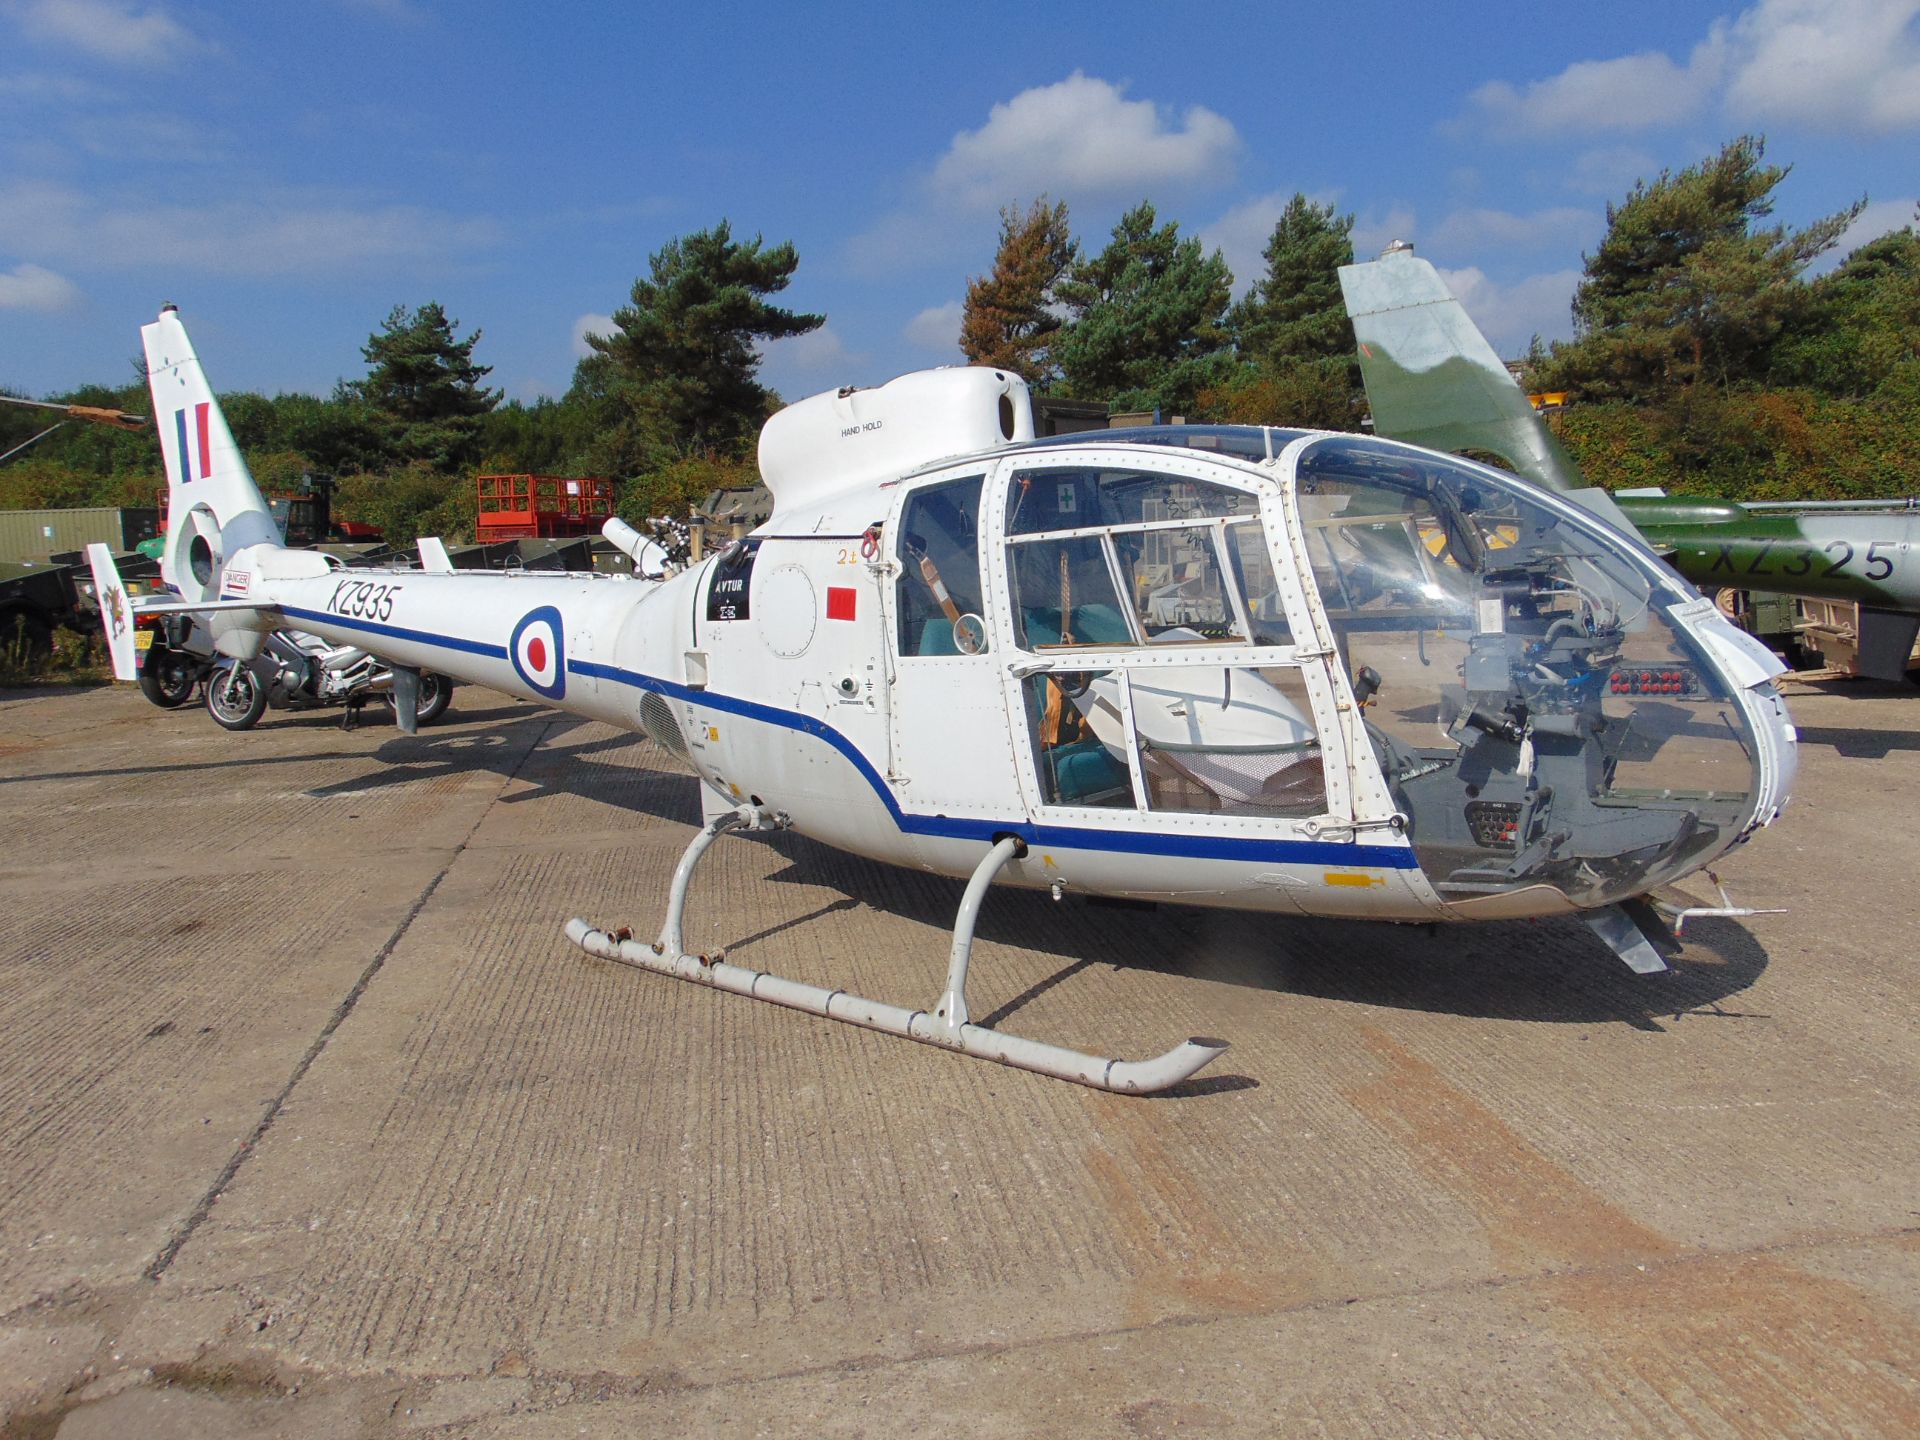 GAZELLE TURBINE HELICOPTER XZ935 Sn 1742 From the UK Ministry of Defence with paperwork as shown.